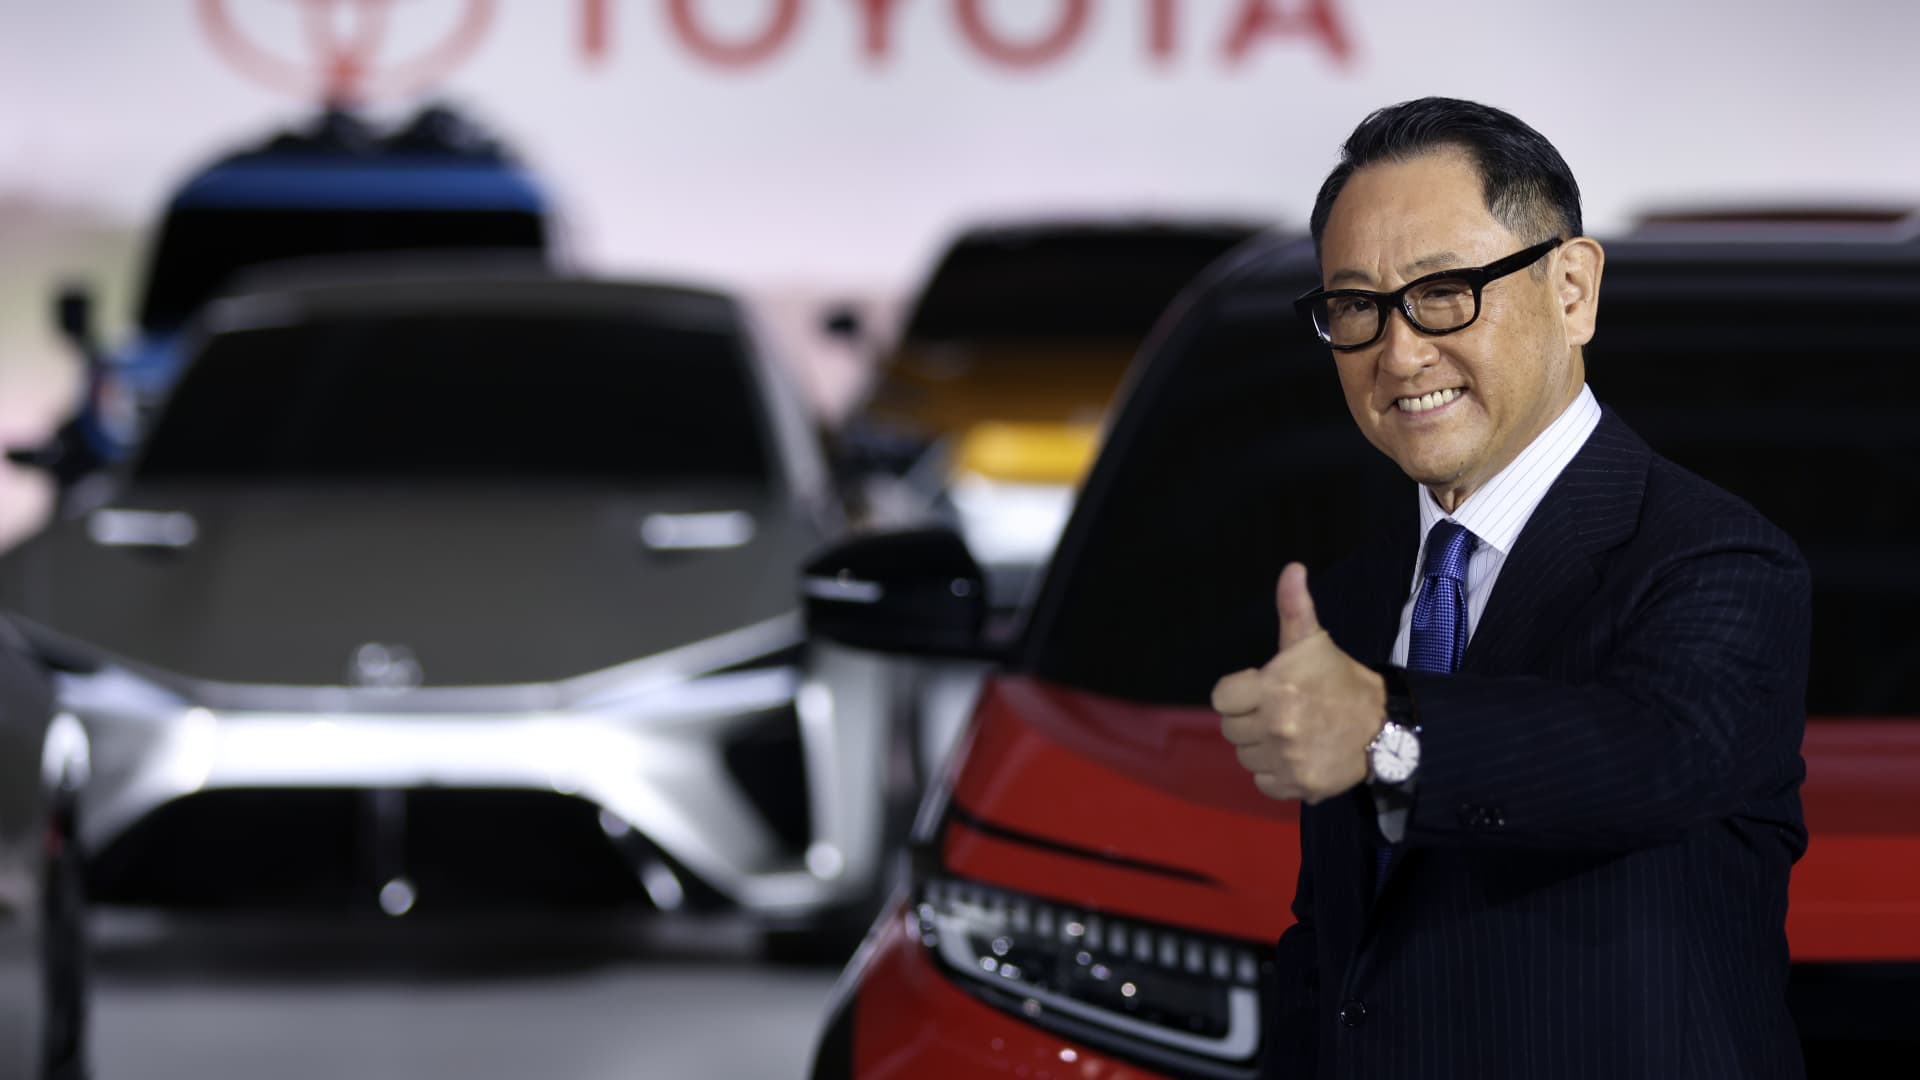 Toyota CEO and President Akio Toyoda to step down - CNBC